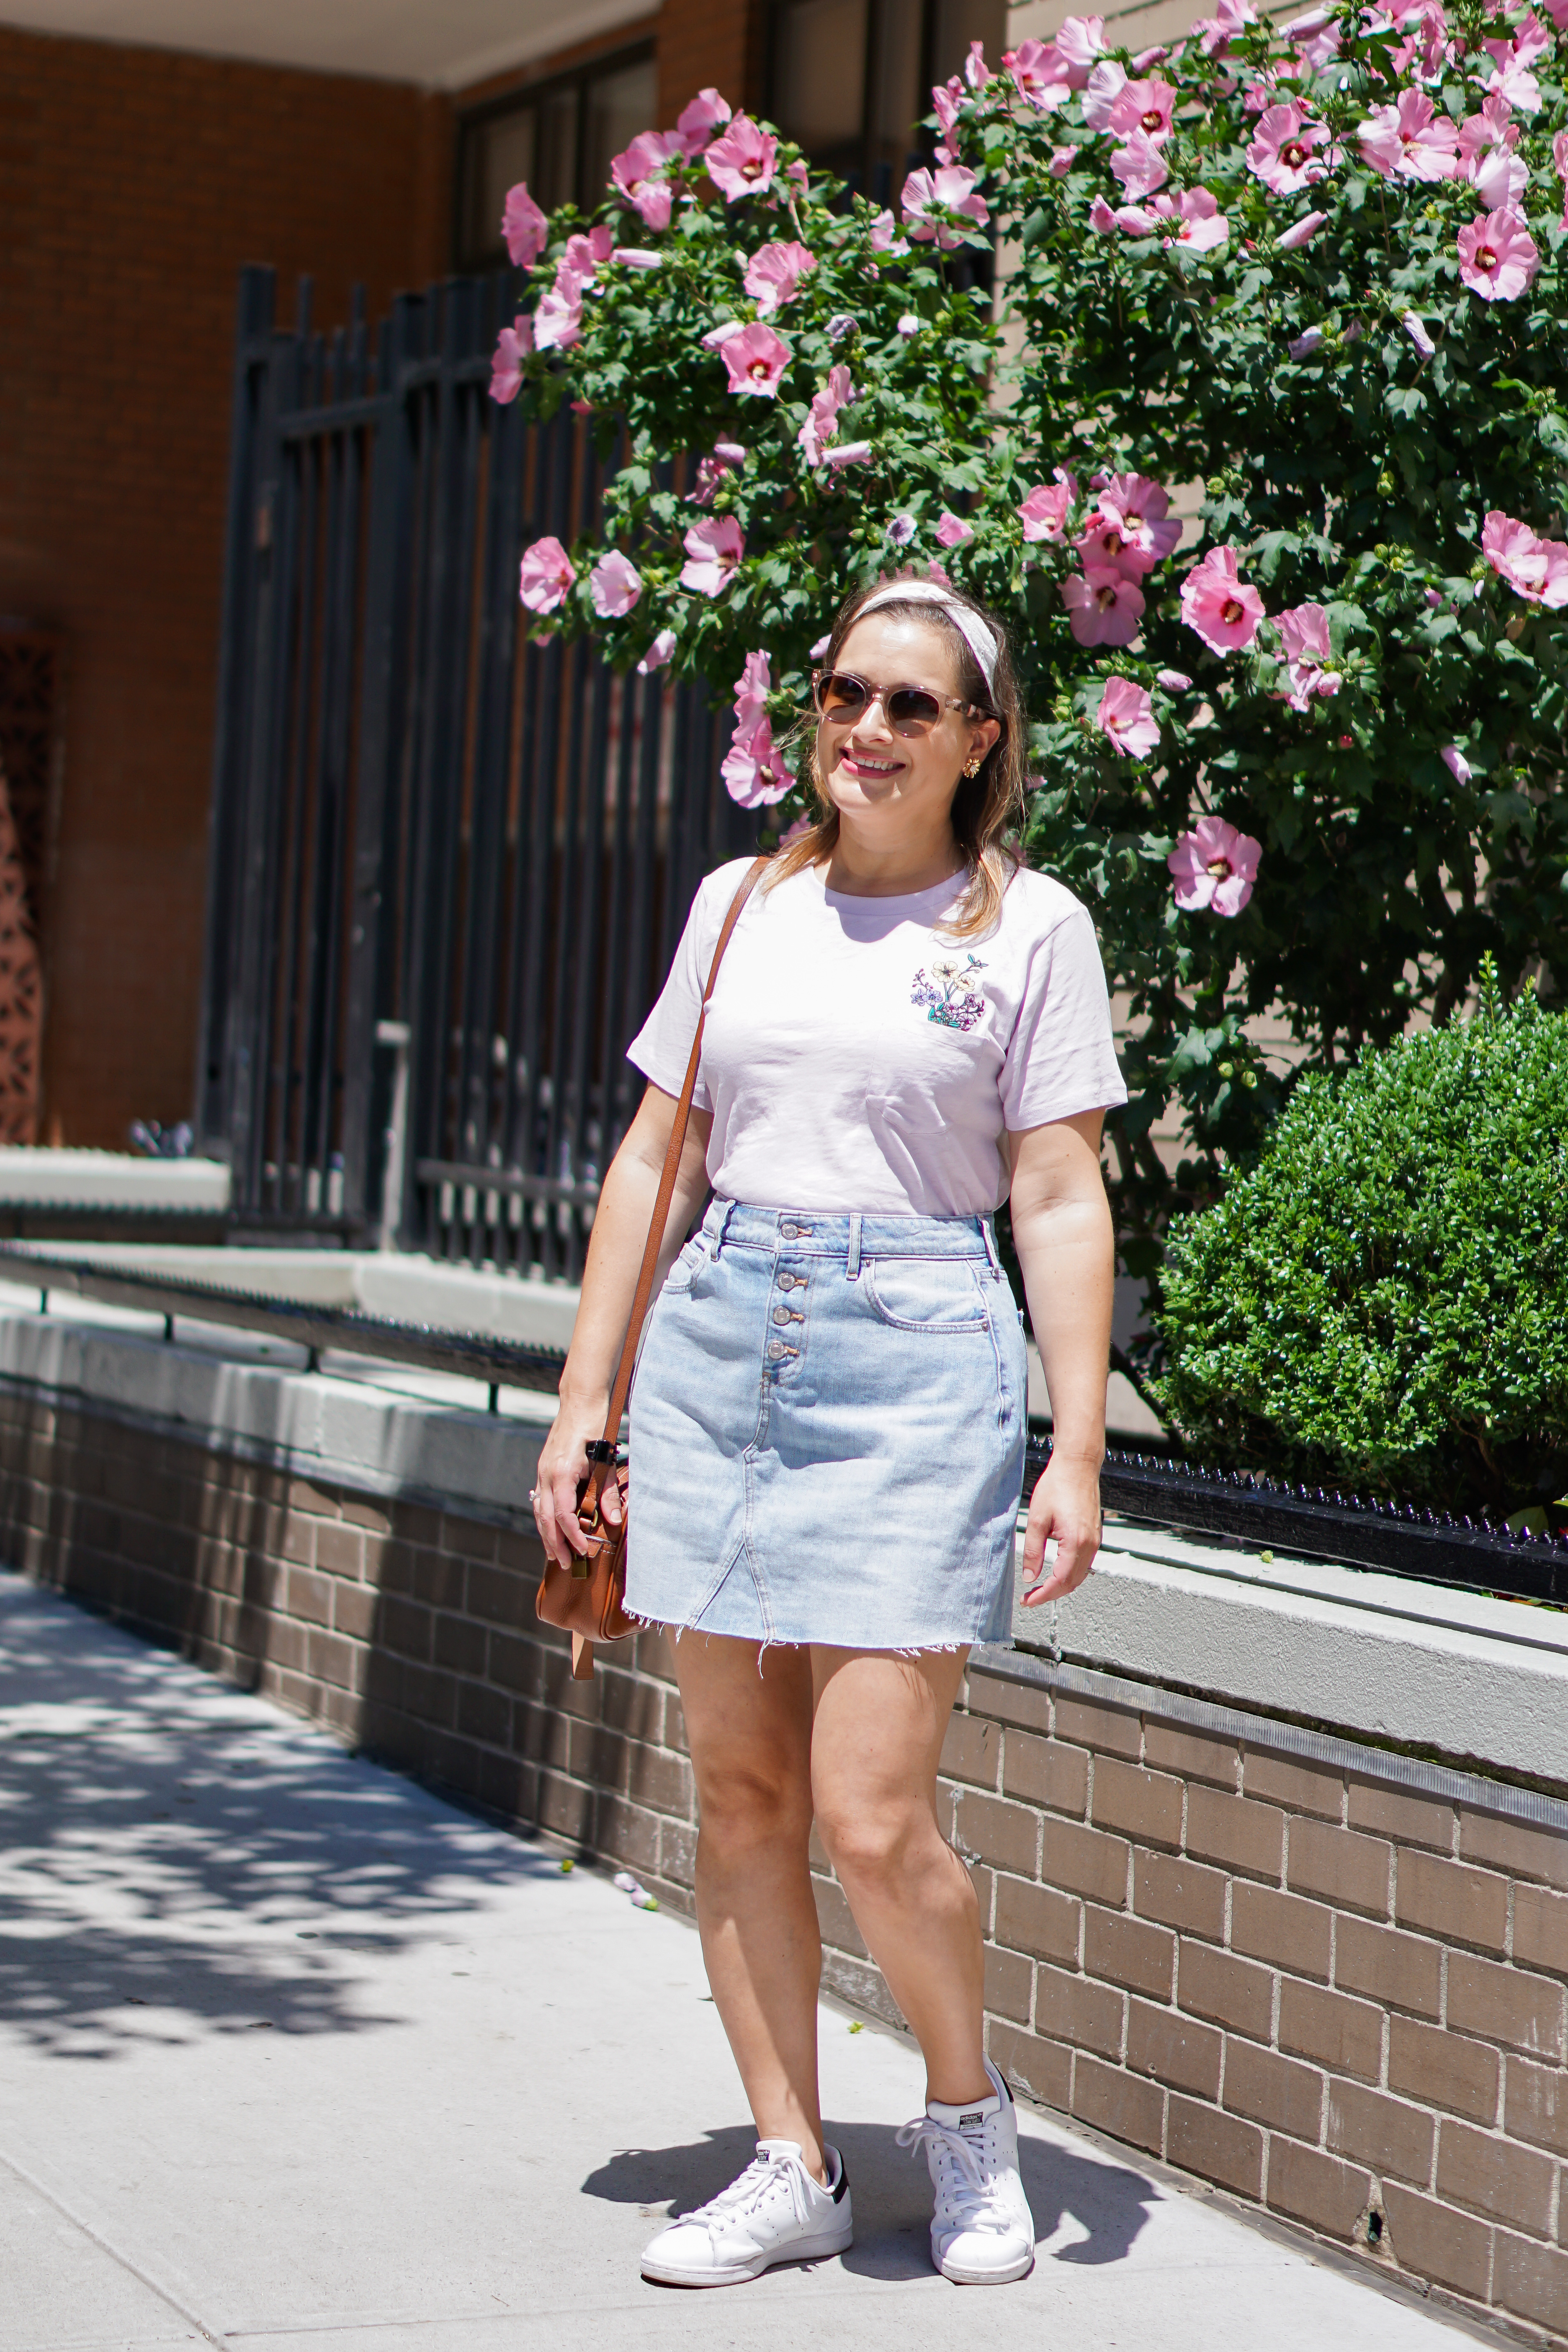 What to wear with a denim skirt